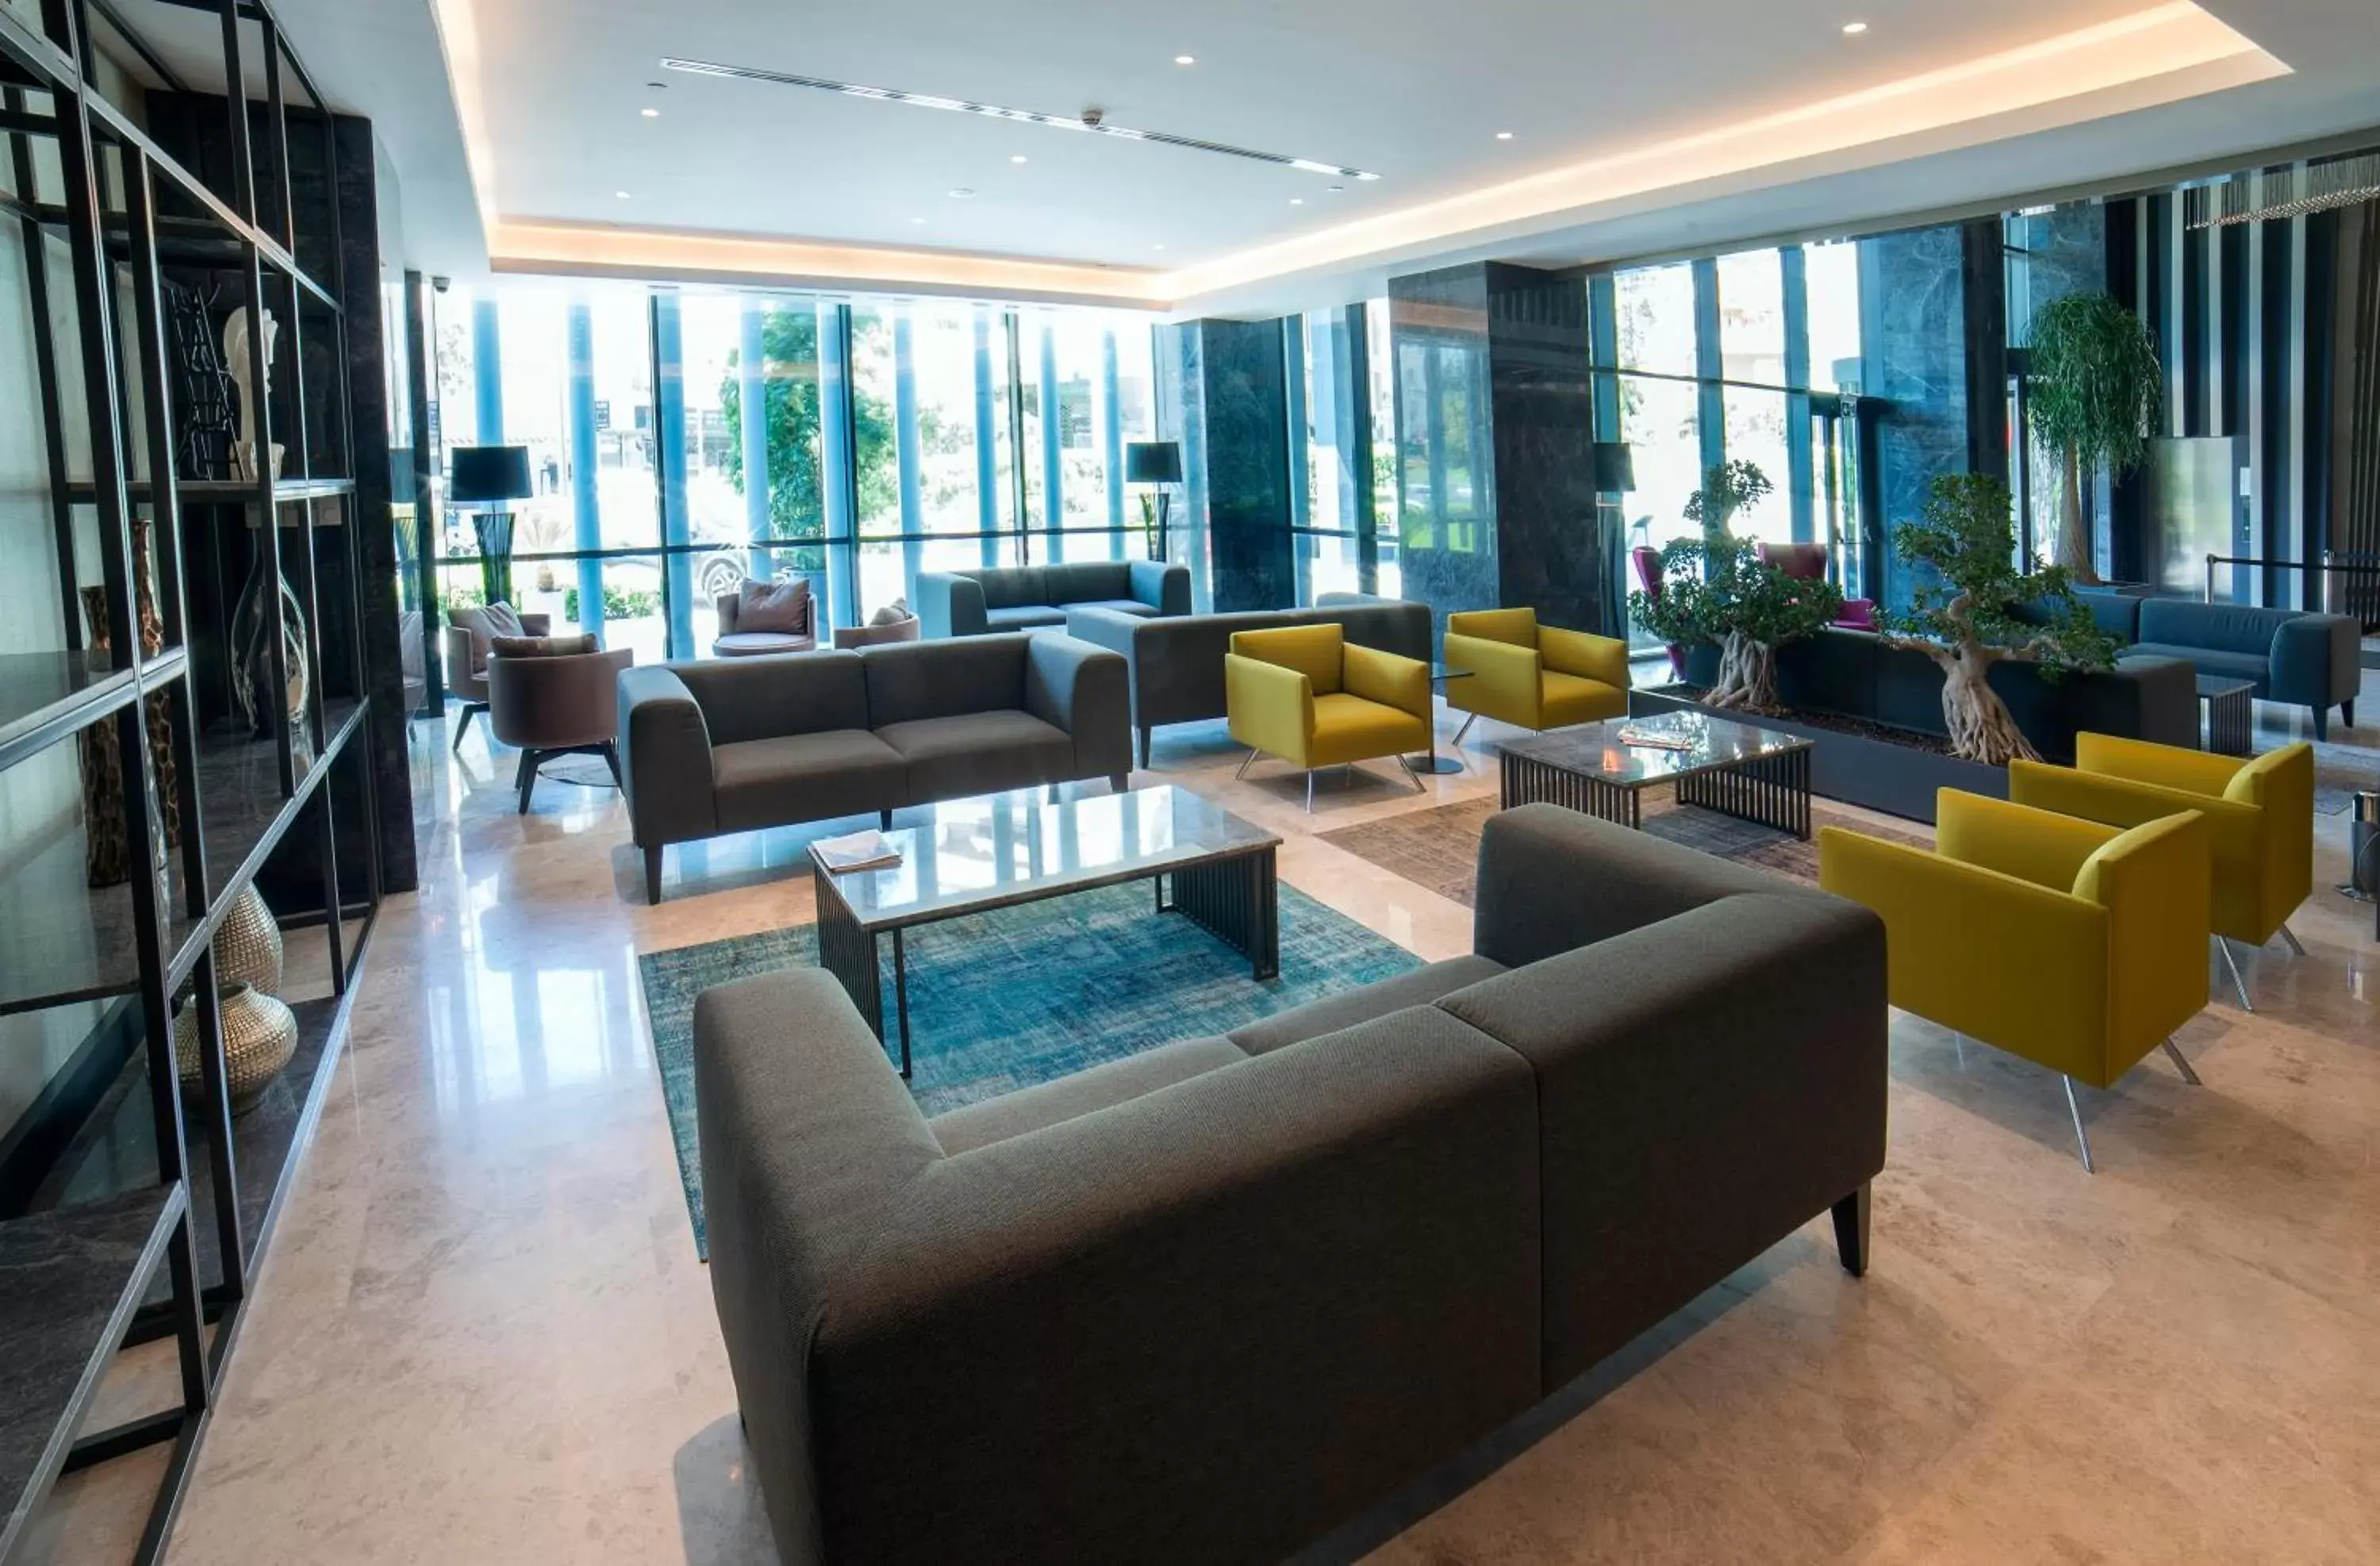 Lobby or reception, Lobby/Reception in Wish More Hotel Istanbul